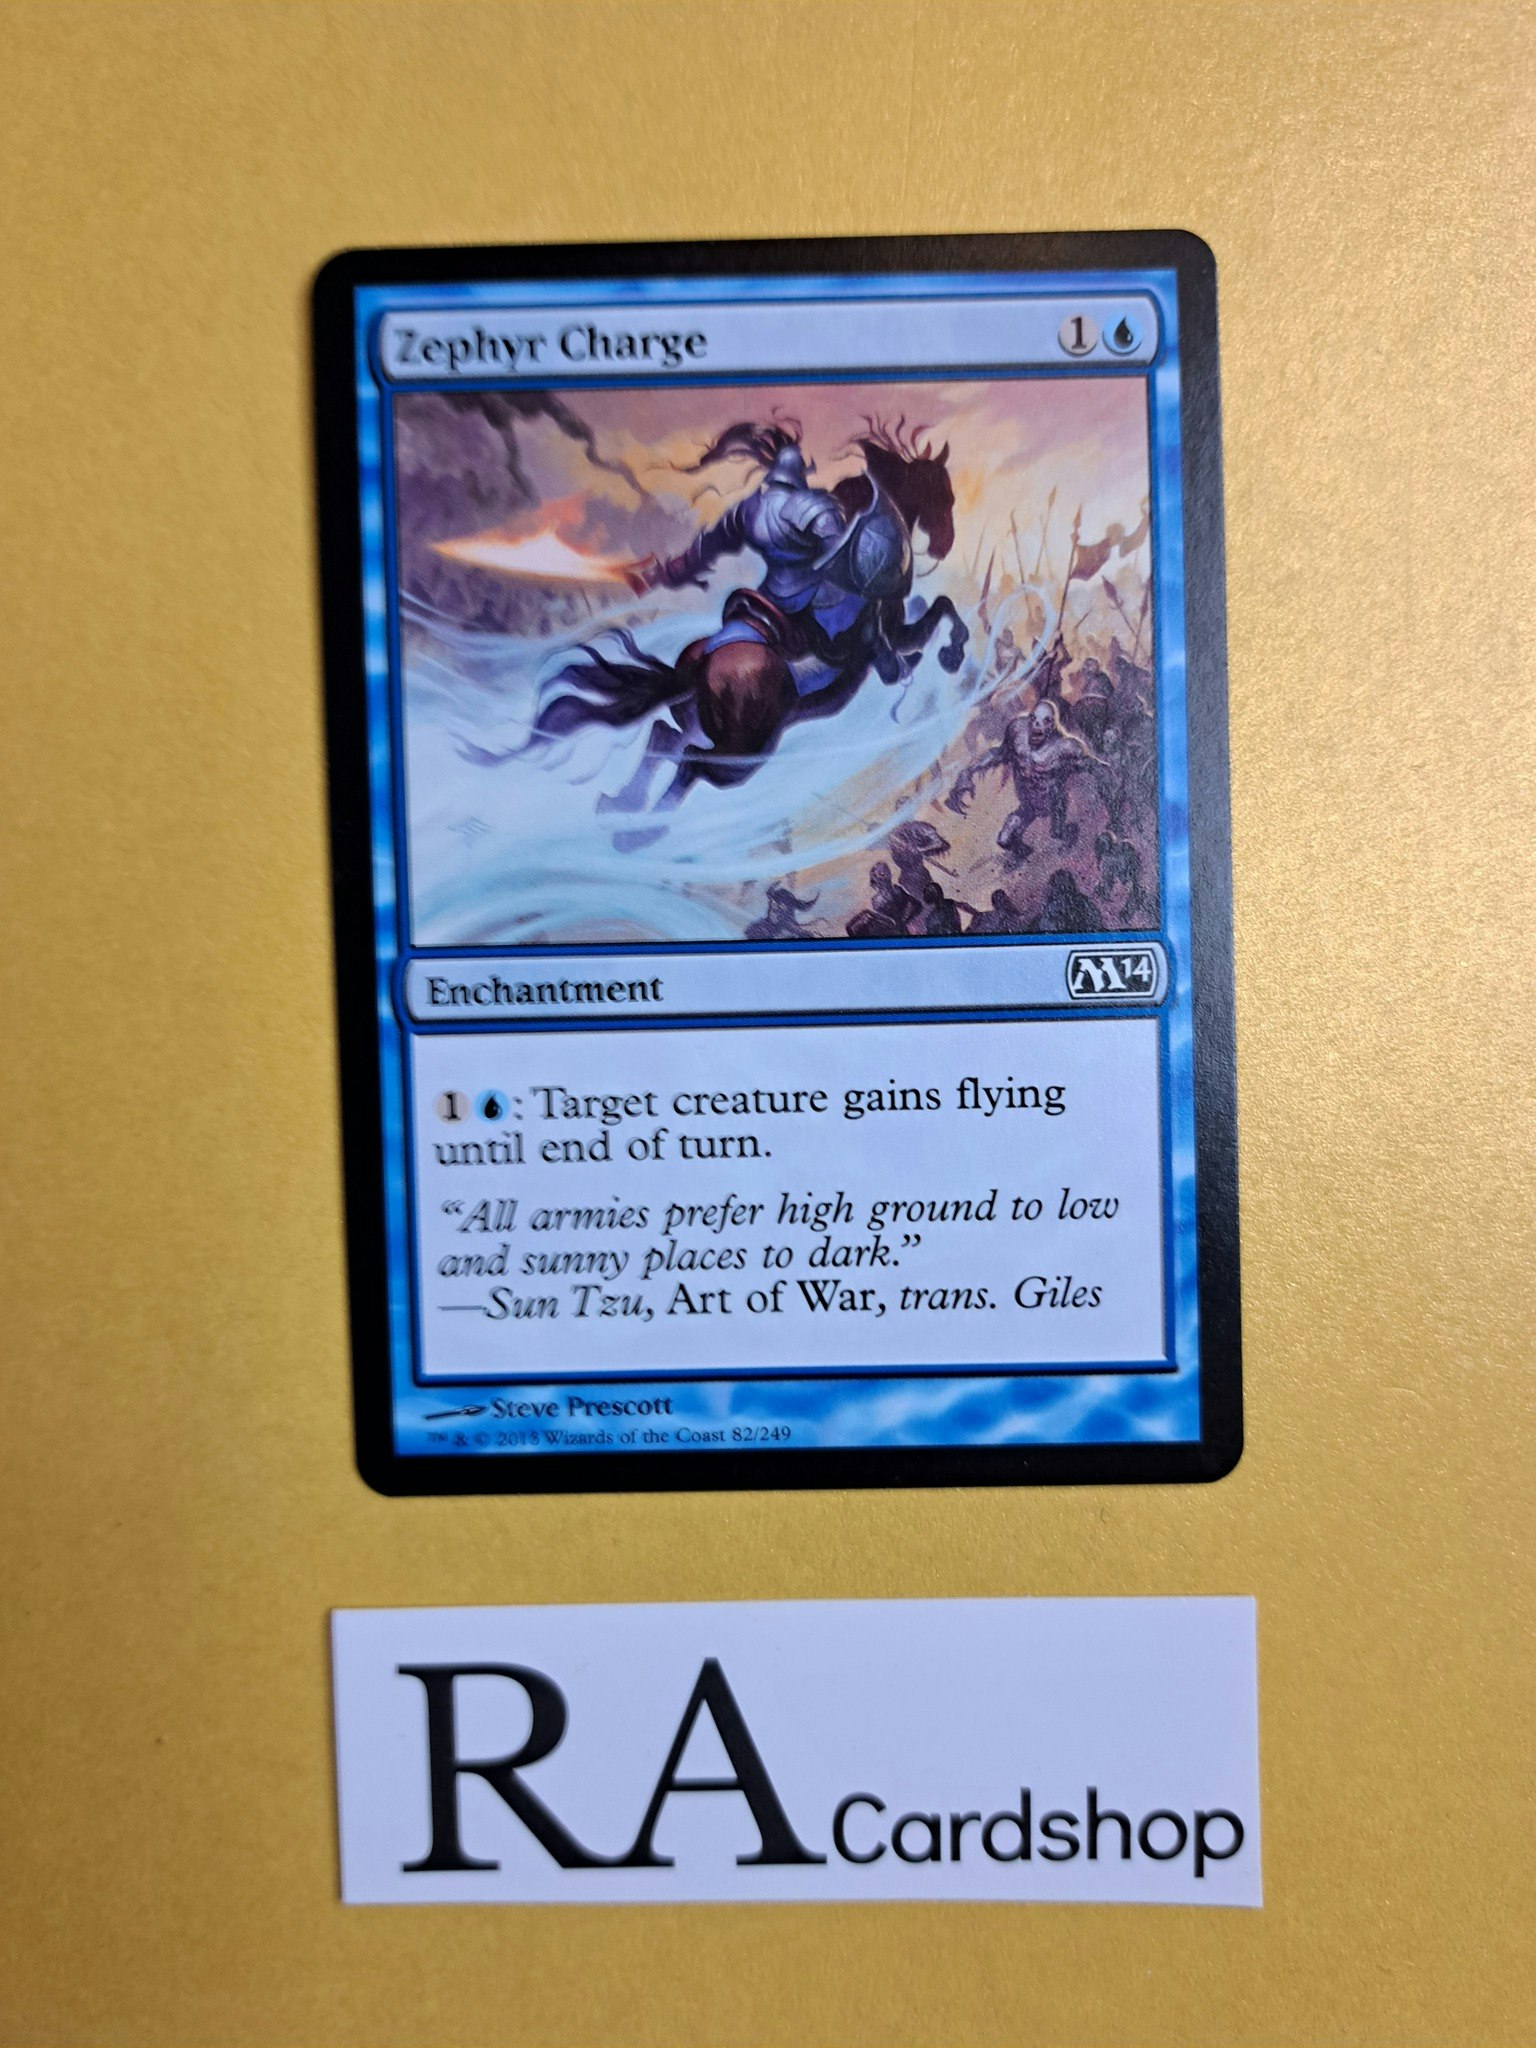 Zephyr Charge Common 82/249 Magic 2014 (M14) Magic the Gathering